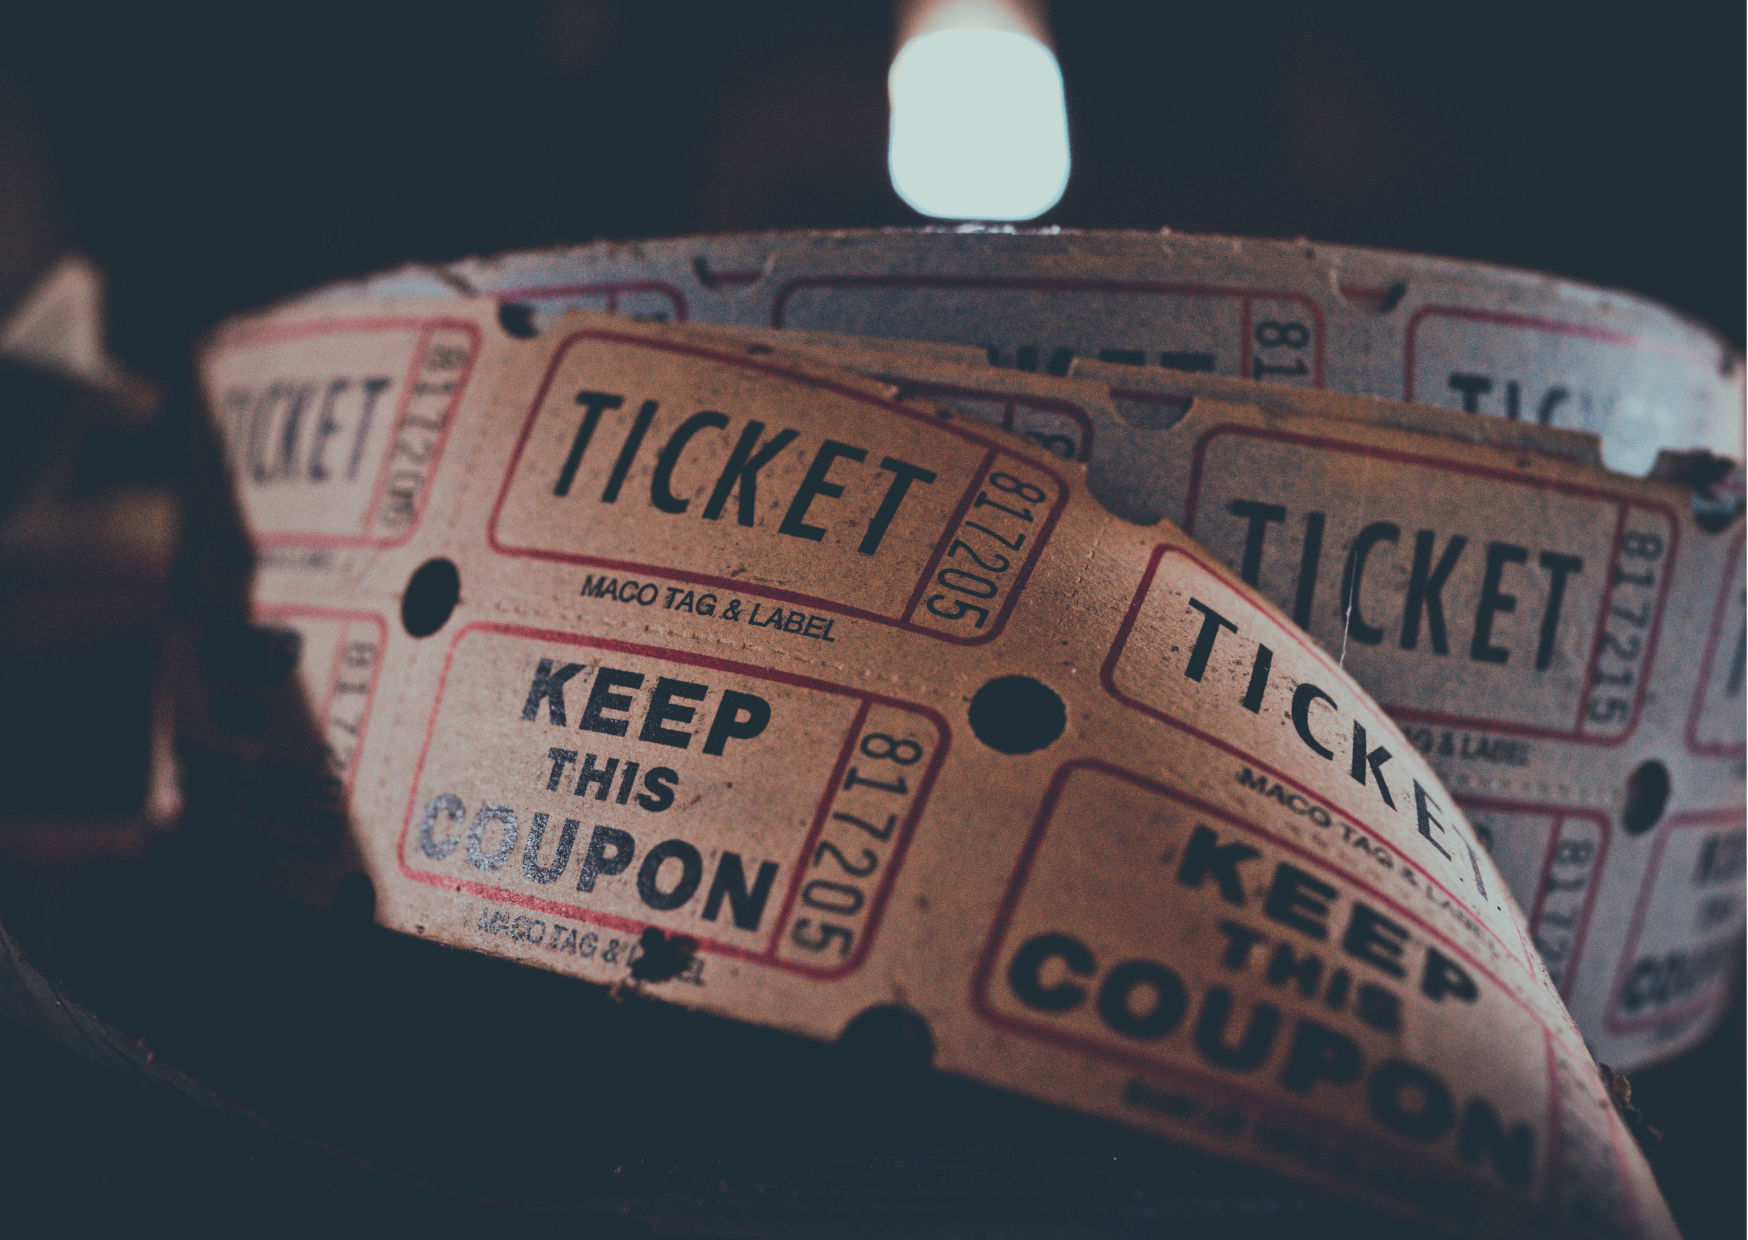 a roll of tickets with black and white text